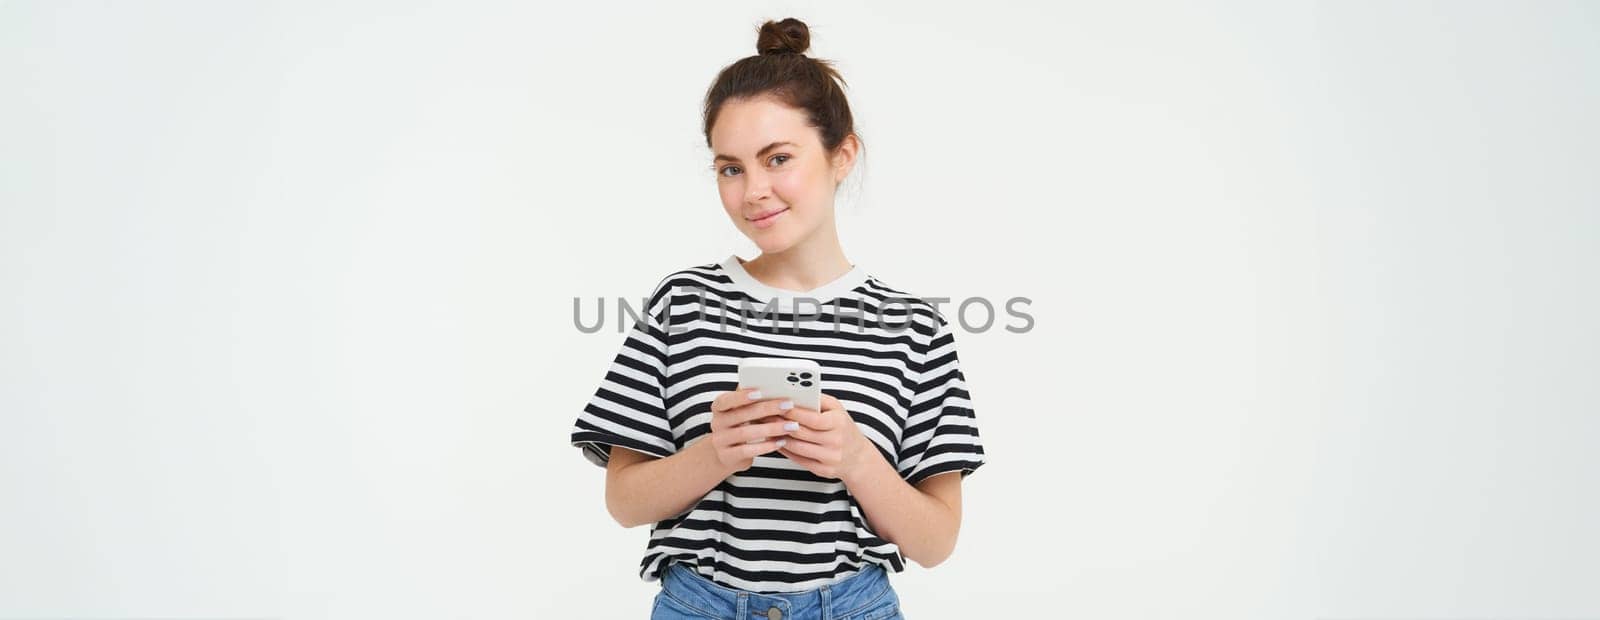 Portrait of smiling european woman, holding smartphone, using mobile app, online shopping, concept of technology.